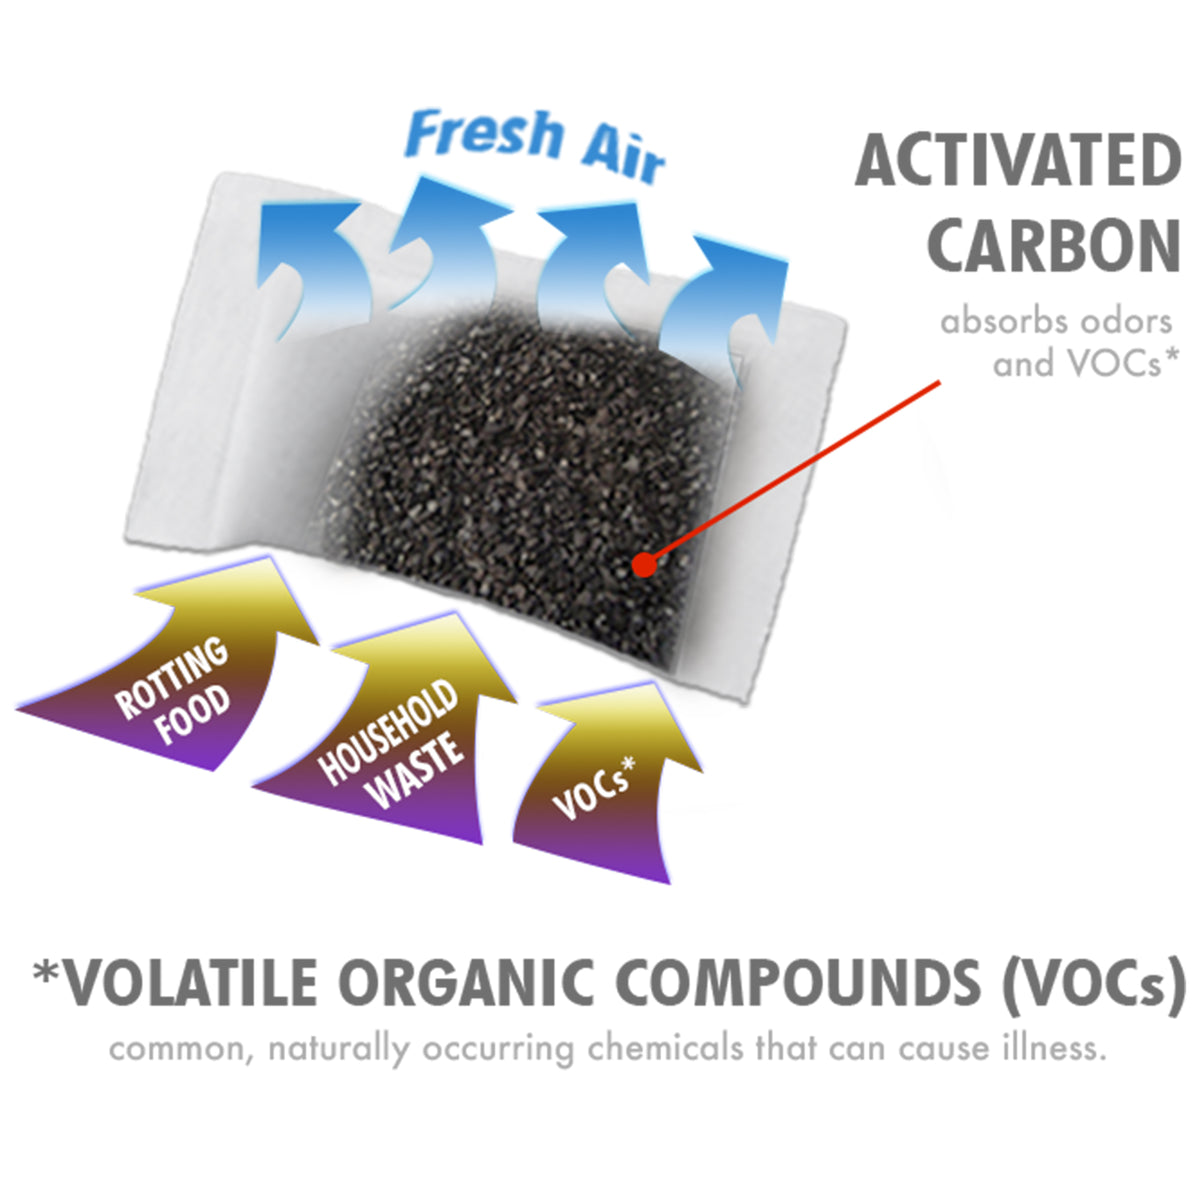 Activated carbon absorbs odors and VOCs